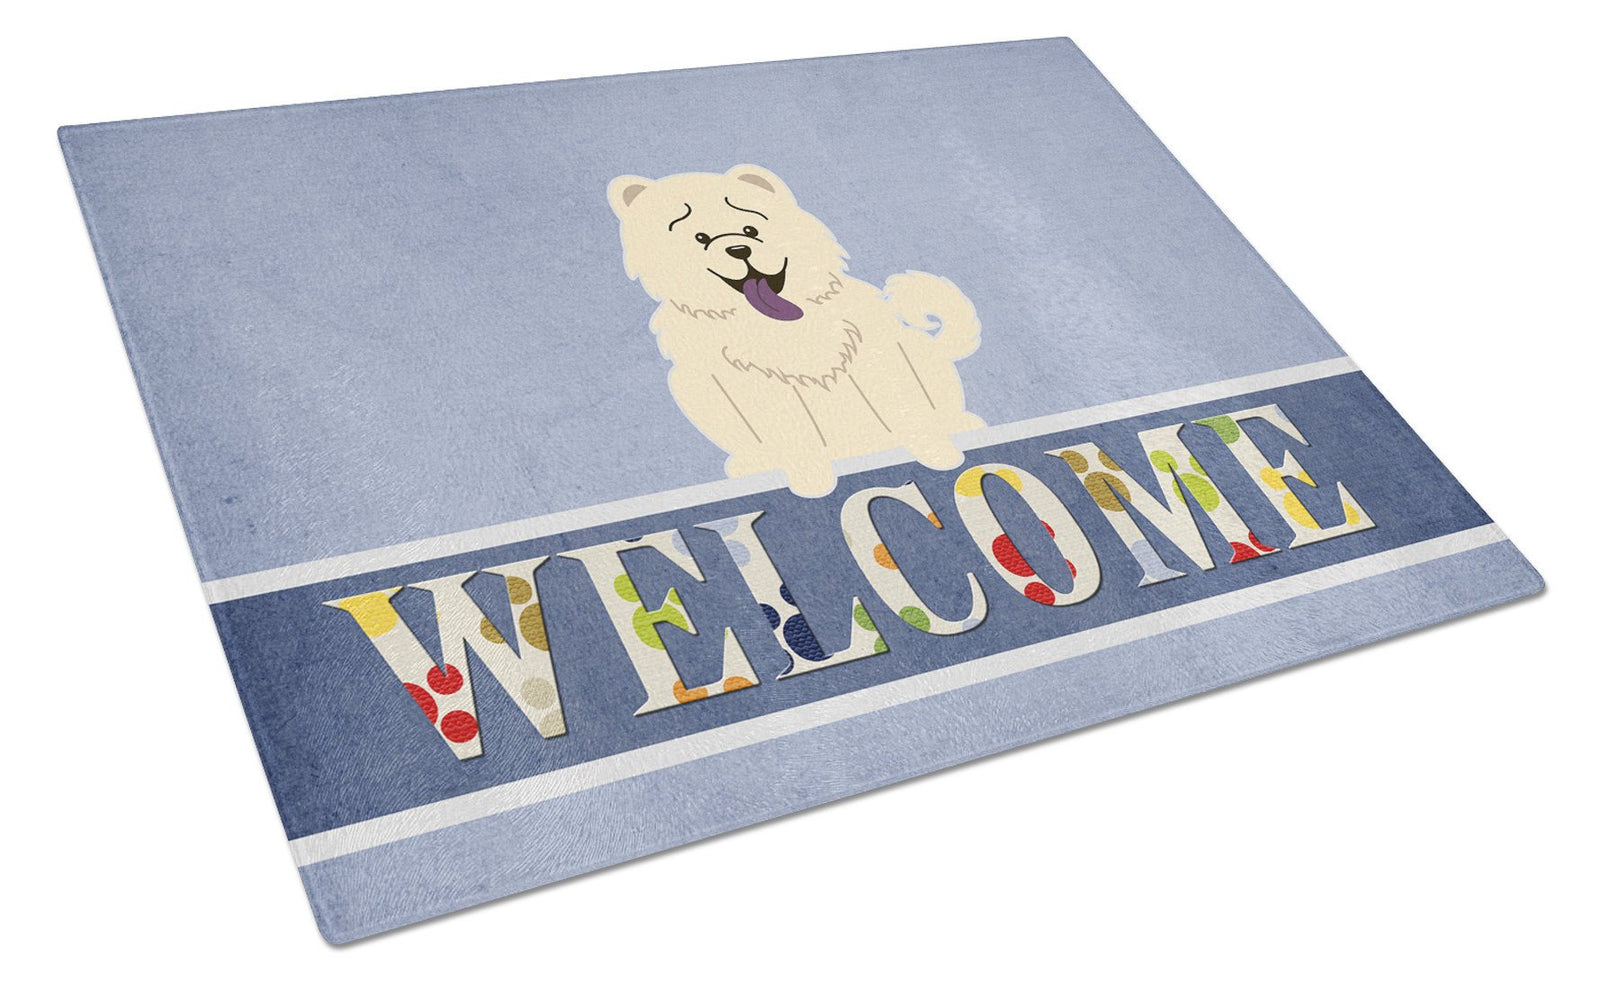 Chow Chow White Welcome Glass Cutting Board Large BB5721LCB by Caroline's Treasures